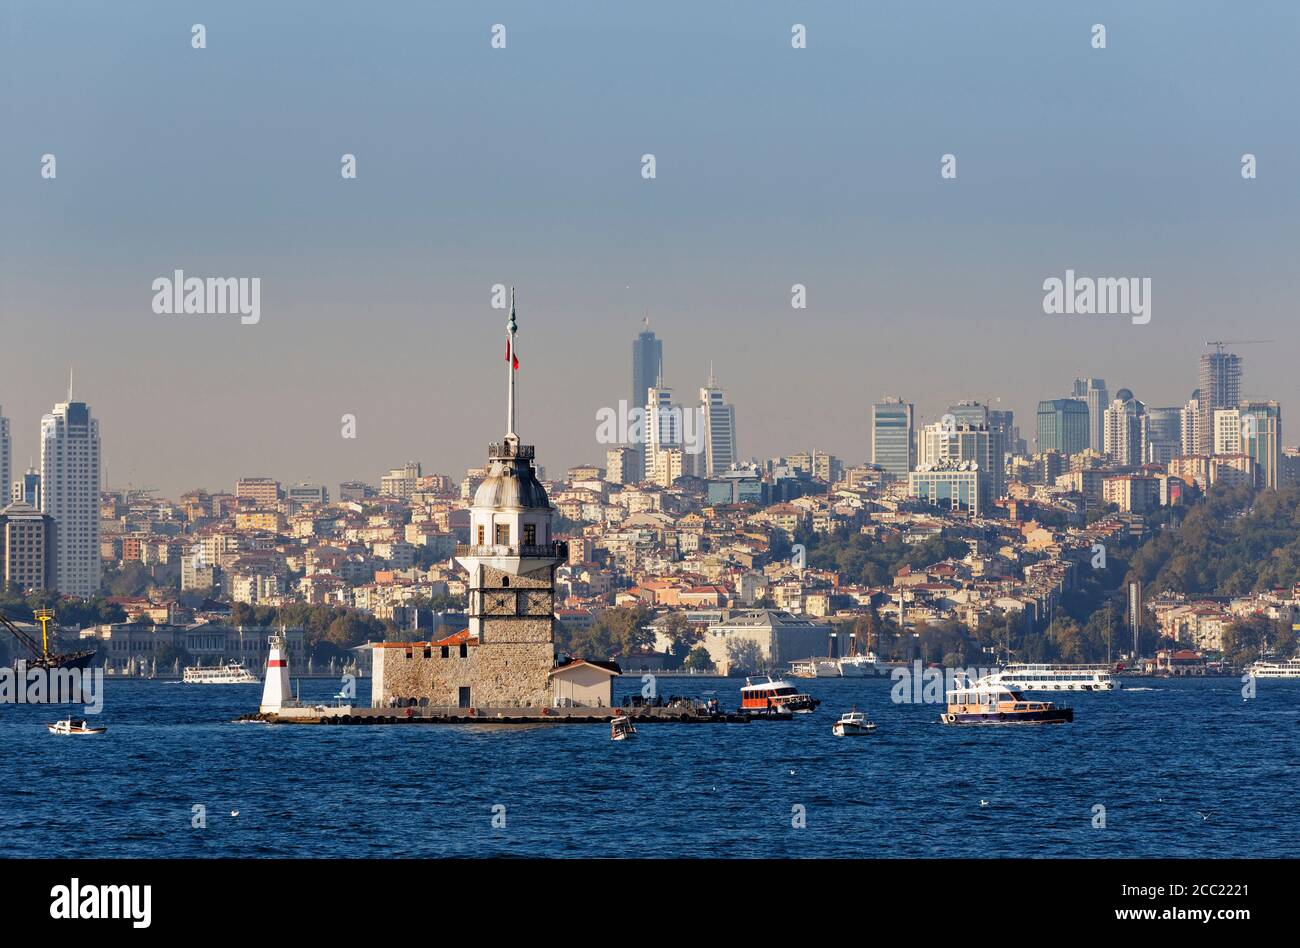 Turkey, Istanbul, View of Maiden's Tower at Bosphorus Stock Photo